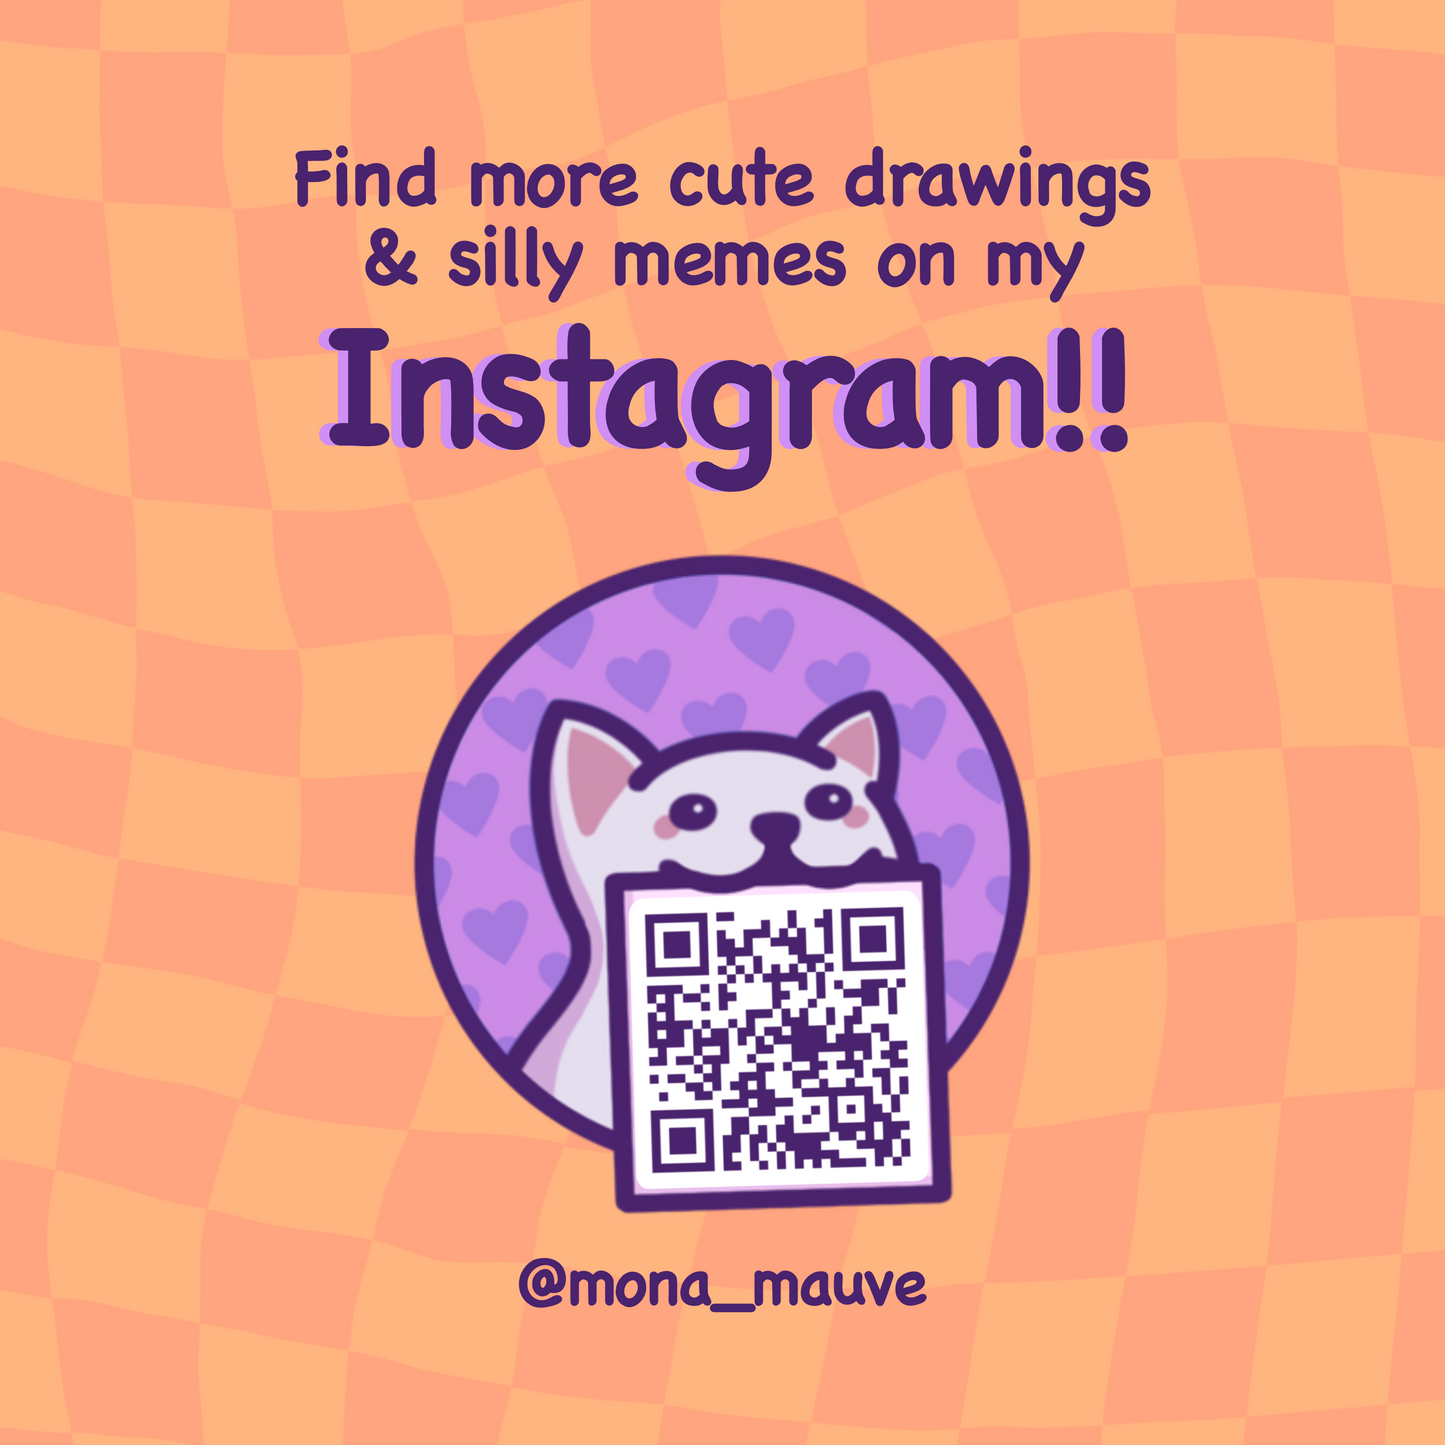 Follow me on Instagram for more silly memes, cute drawings and funny cats: @mona_mauve